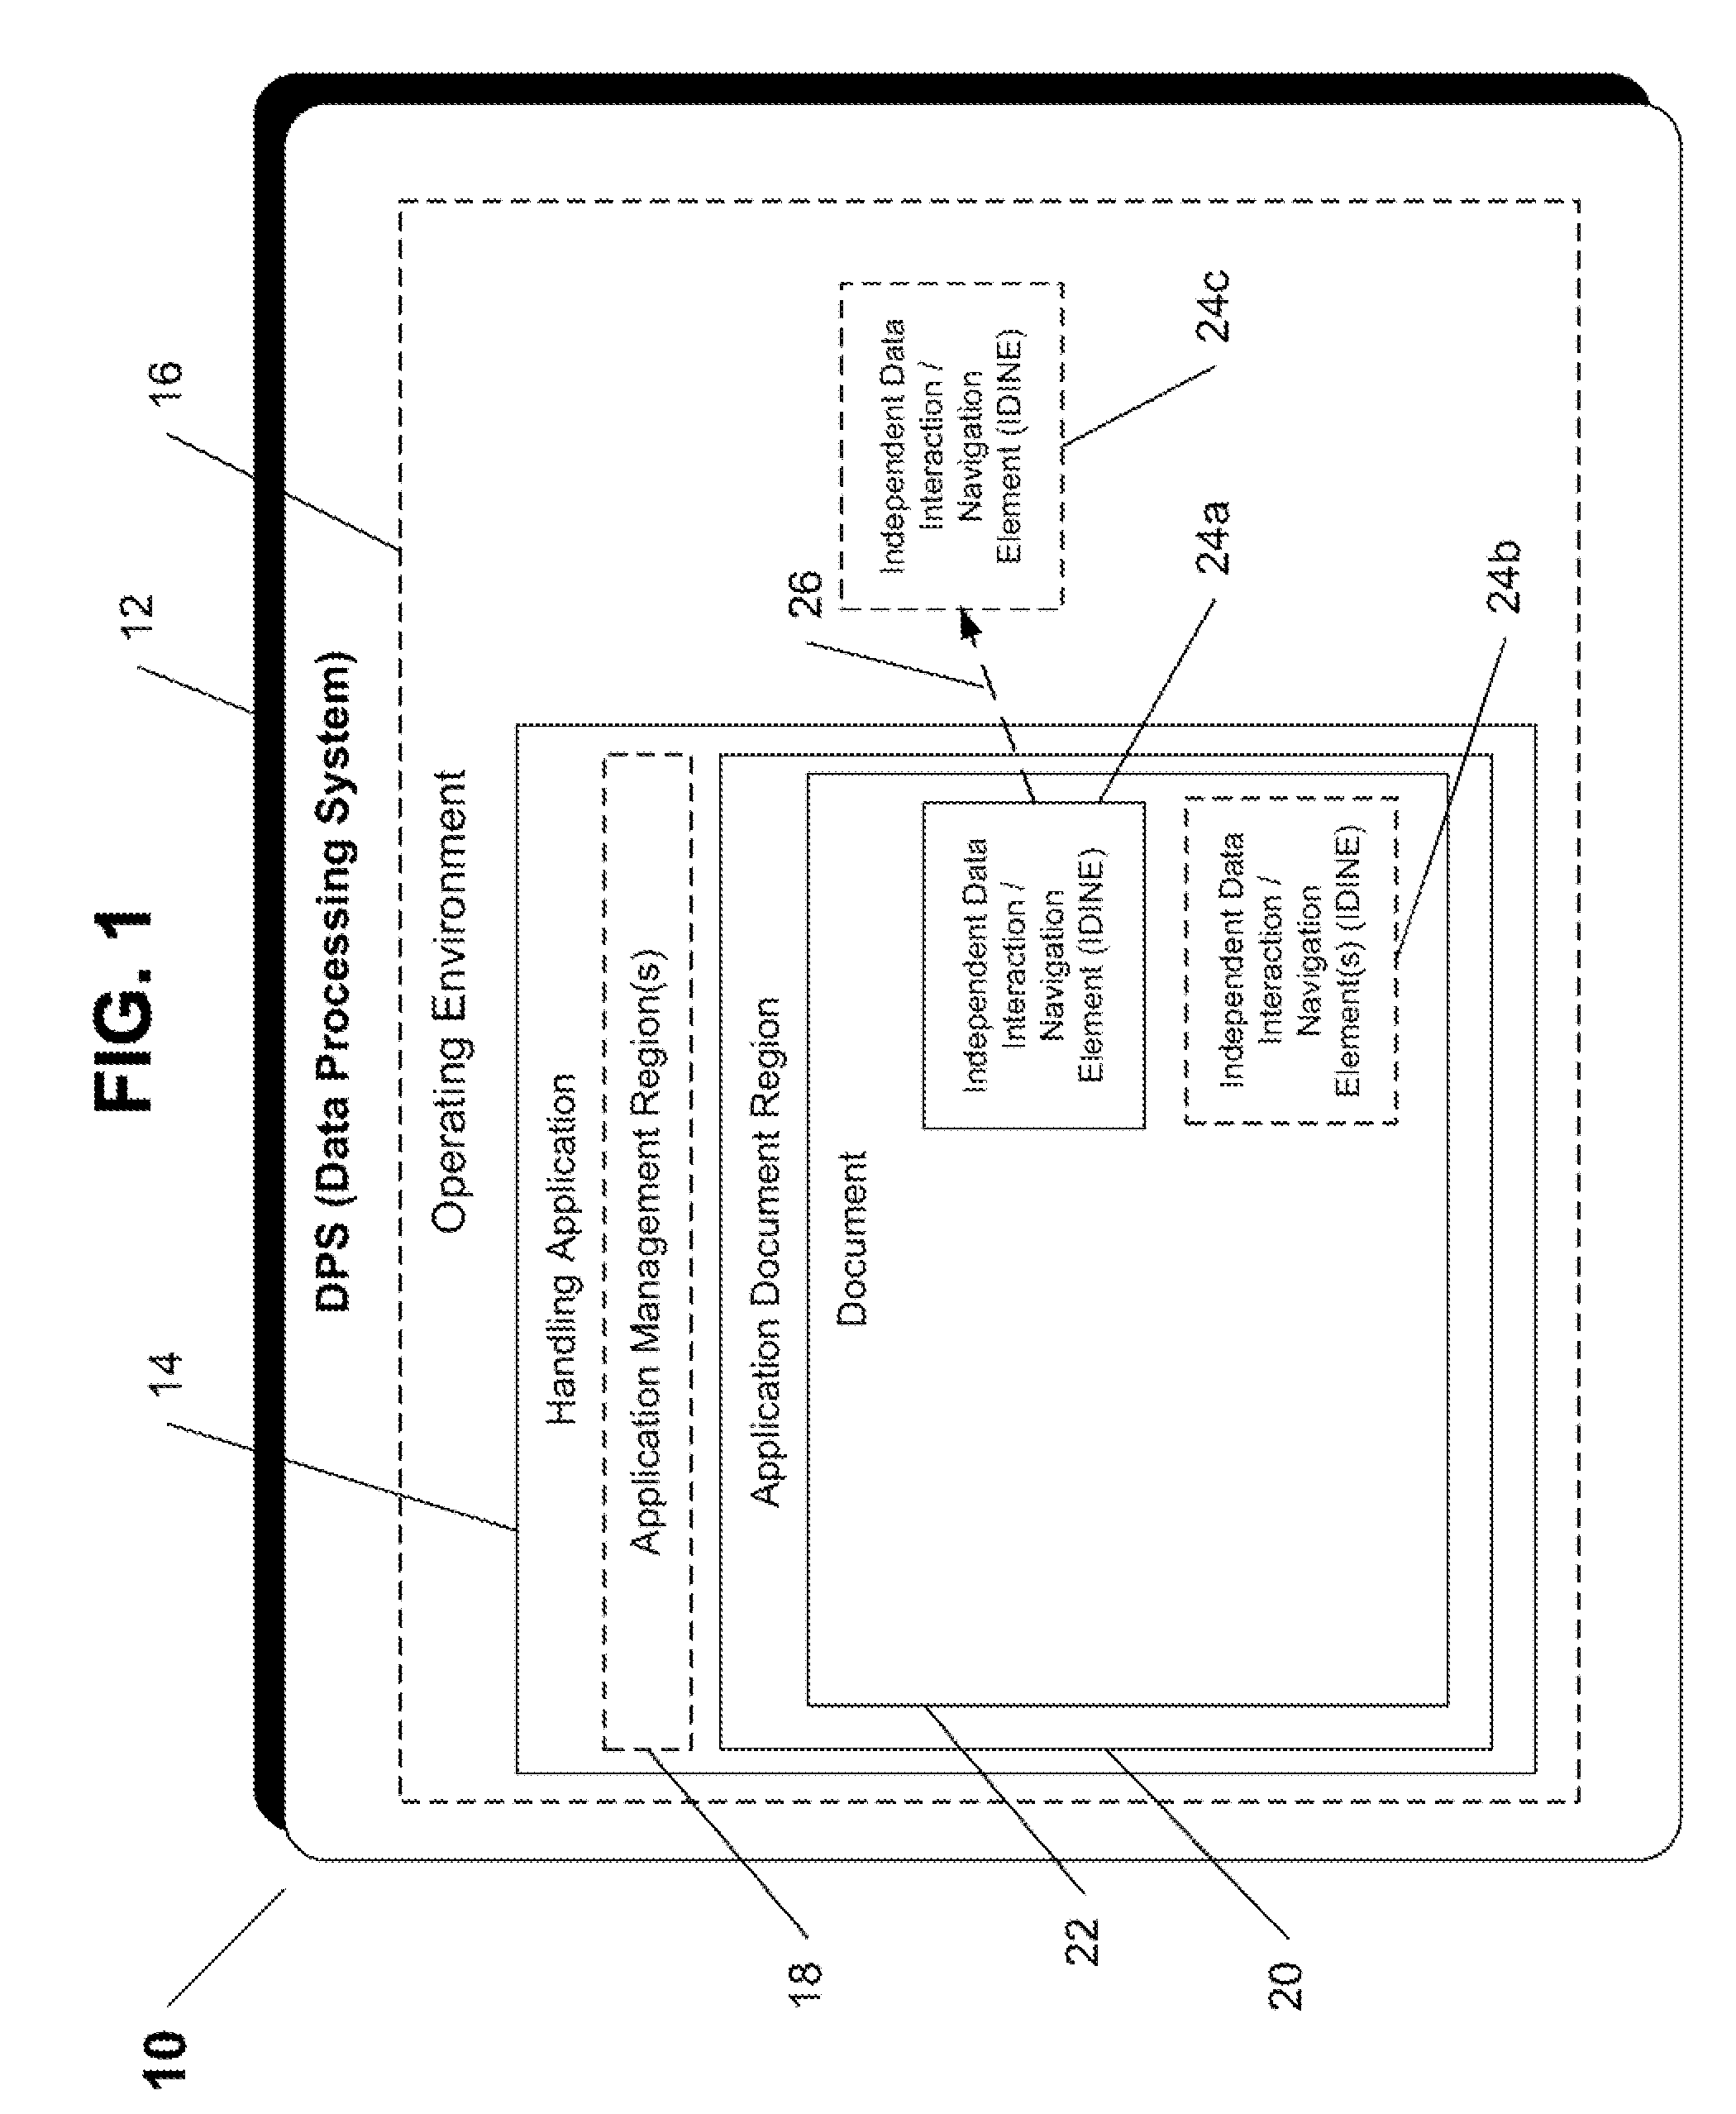 System and Method for Enabling at Least One Independent Data Navigation and Interaction Activity Within a Document